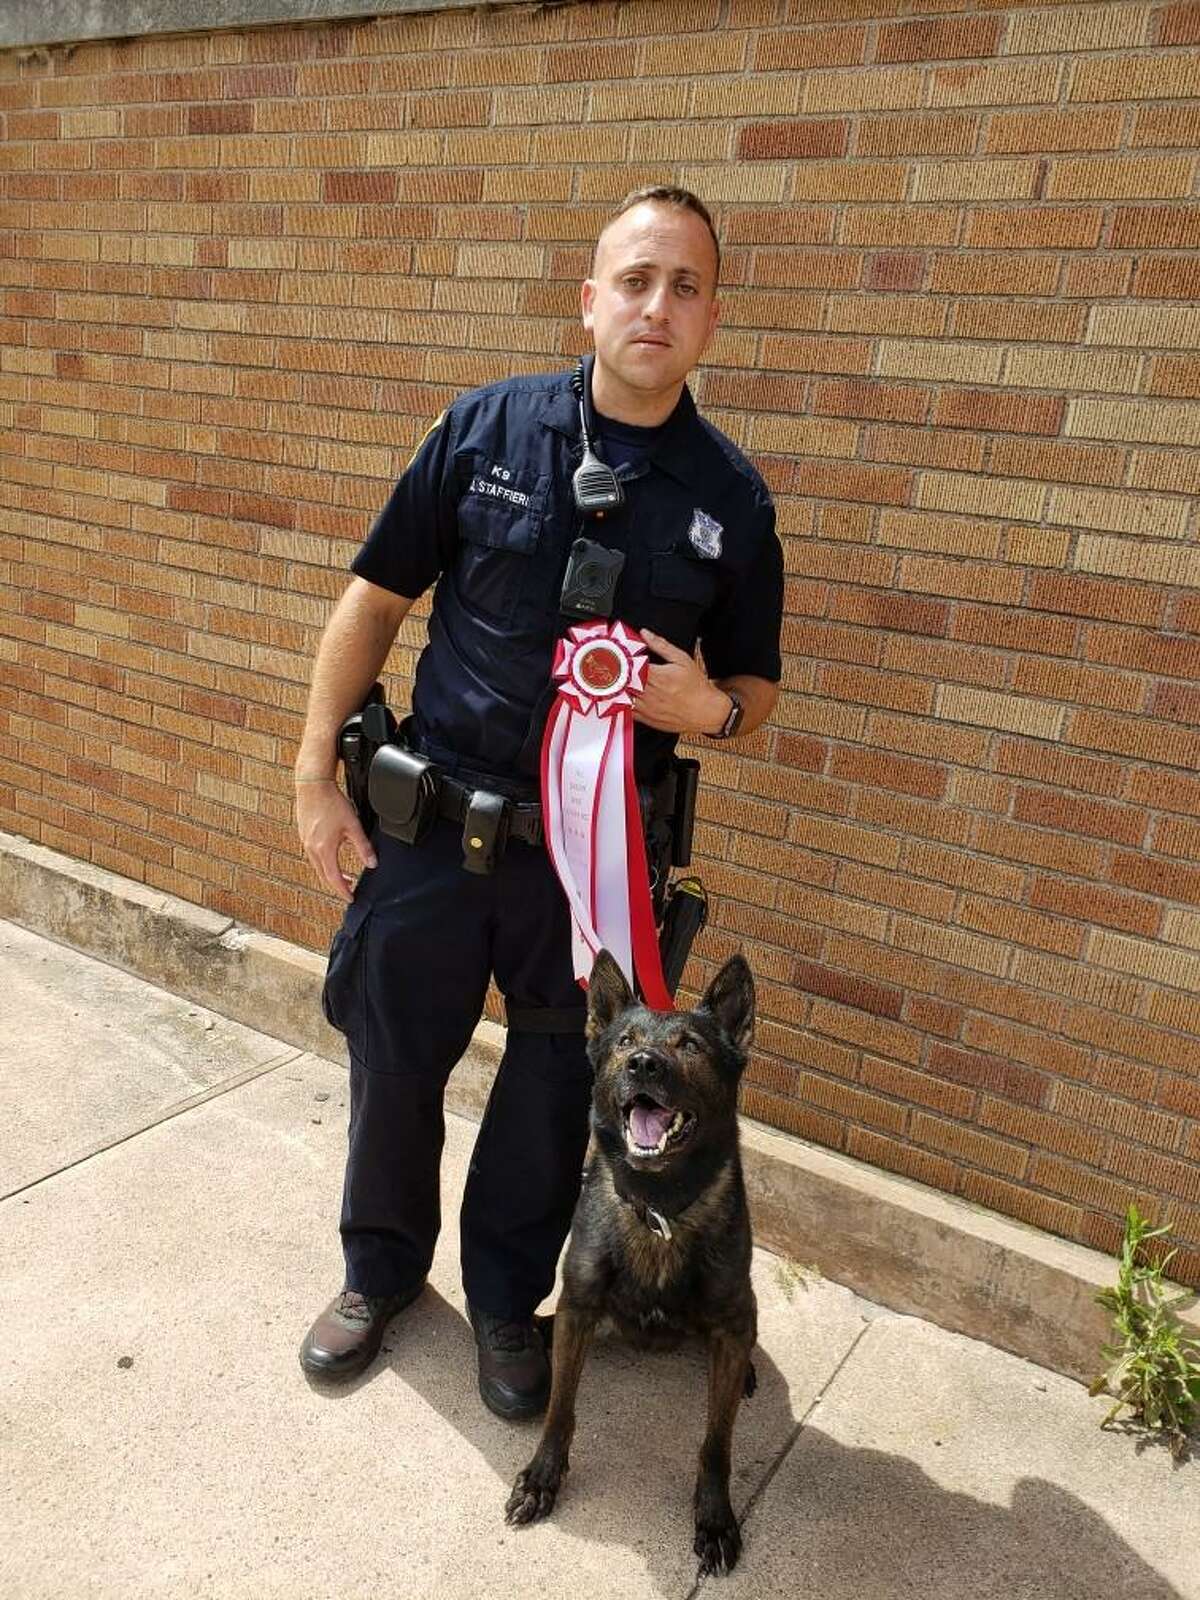 New Haven Police Officer Joseph Staffieri and his canine partner, Magnum, finished second in this year's Dream Ride Canine Challenge Saturday.